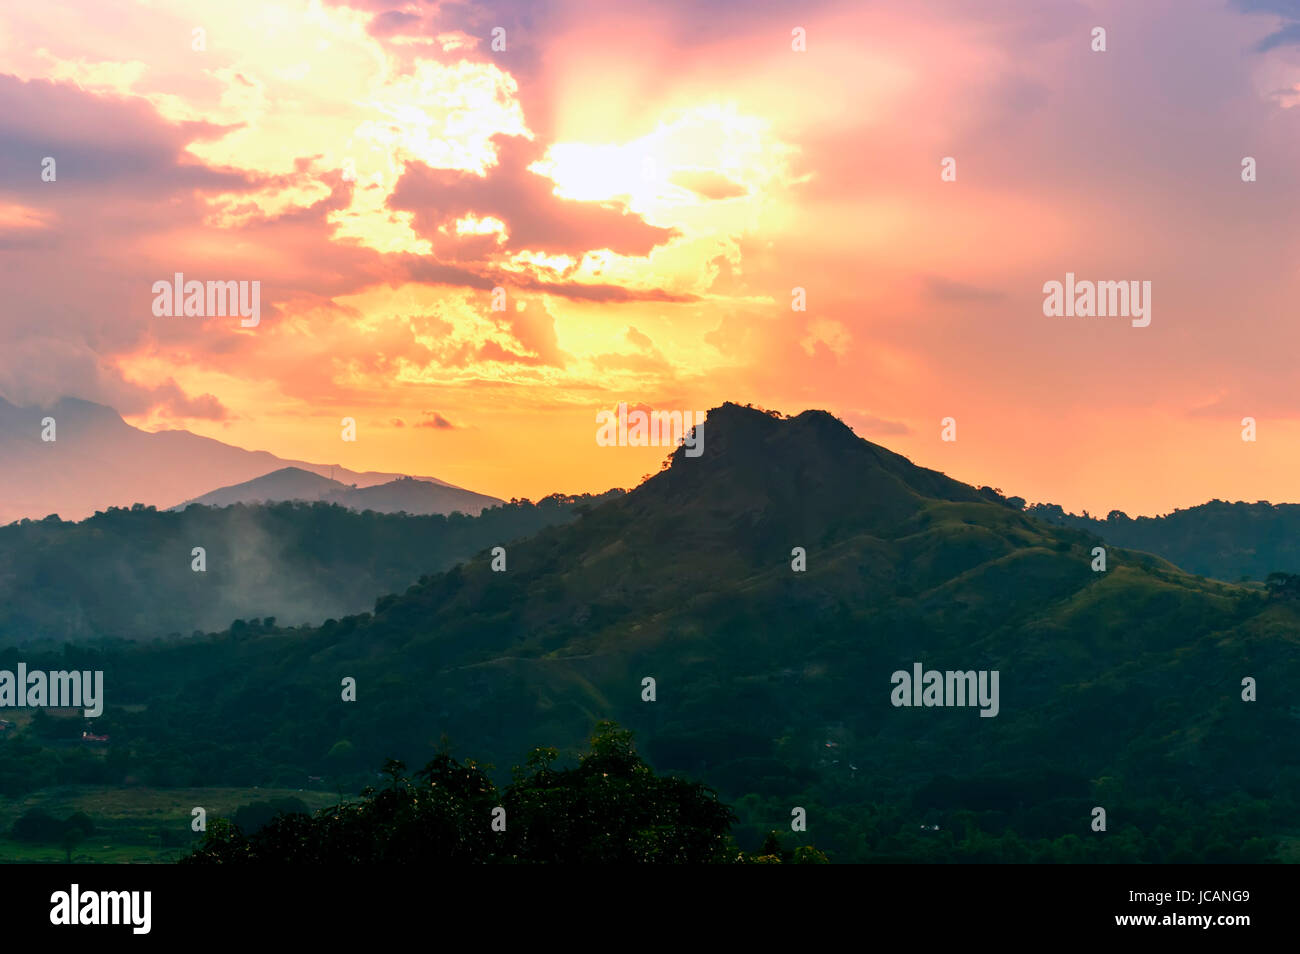 Sun into the Hills. Subic Bay of Luzon Island Philippines. Stock Photo